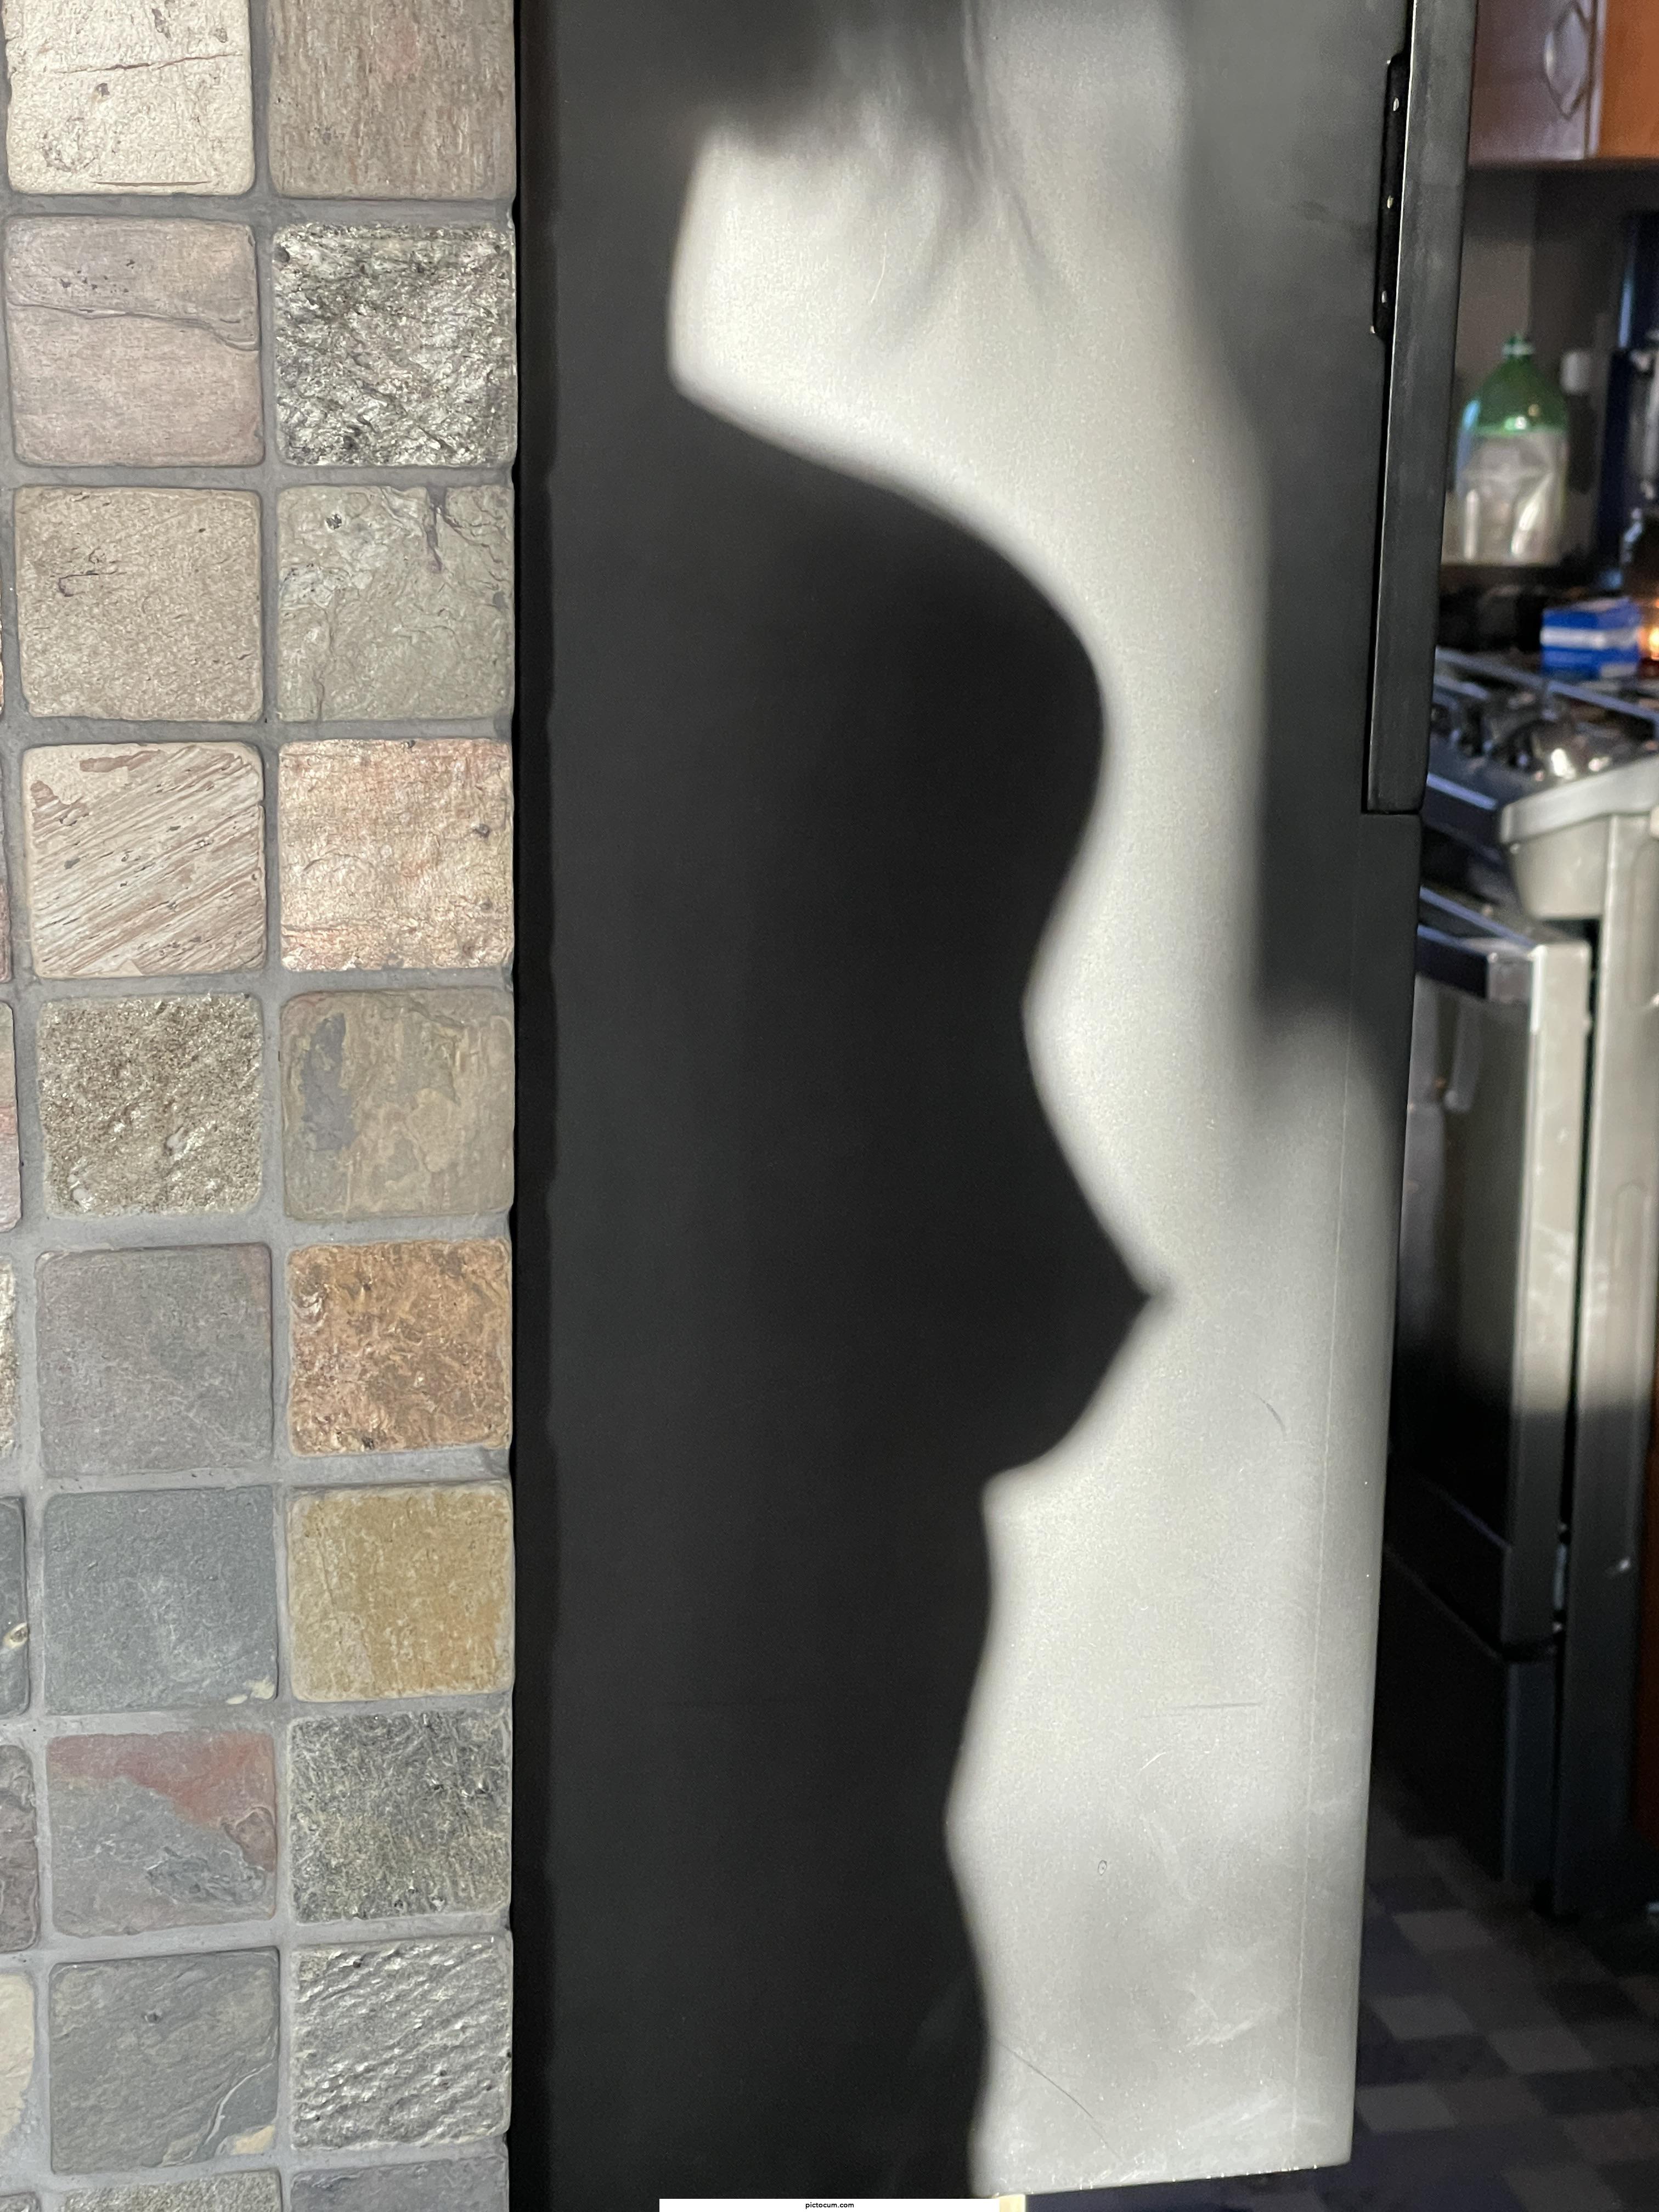 Was walking around naked… noticed my shadow!! Hope it made you smile